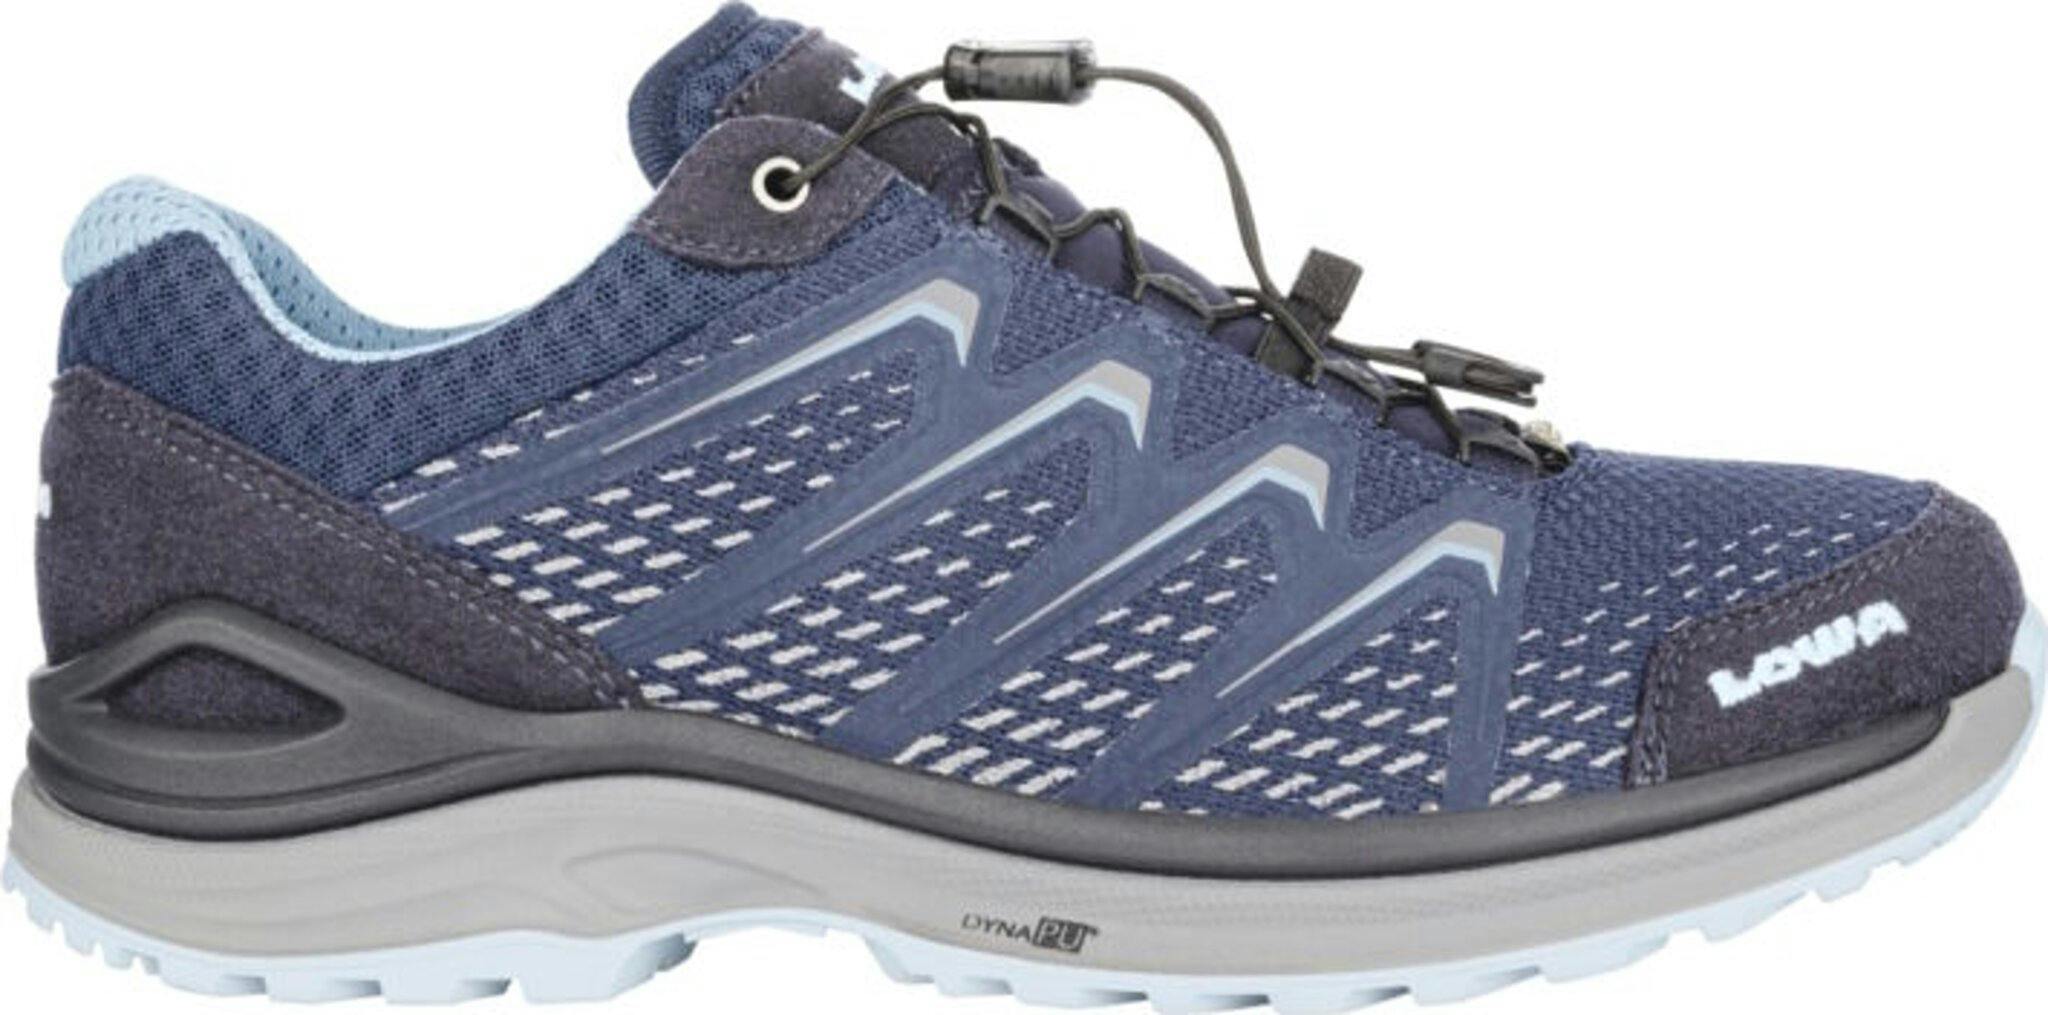 Product image for Maddox Gore-Tex Low Shoes - Women's